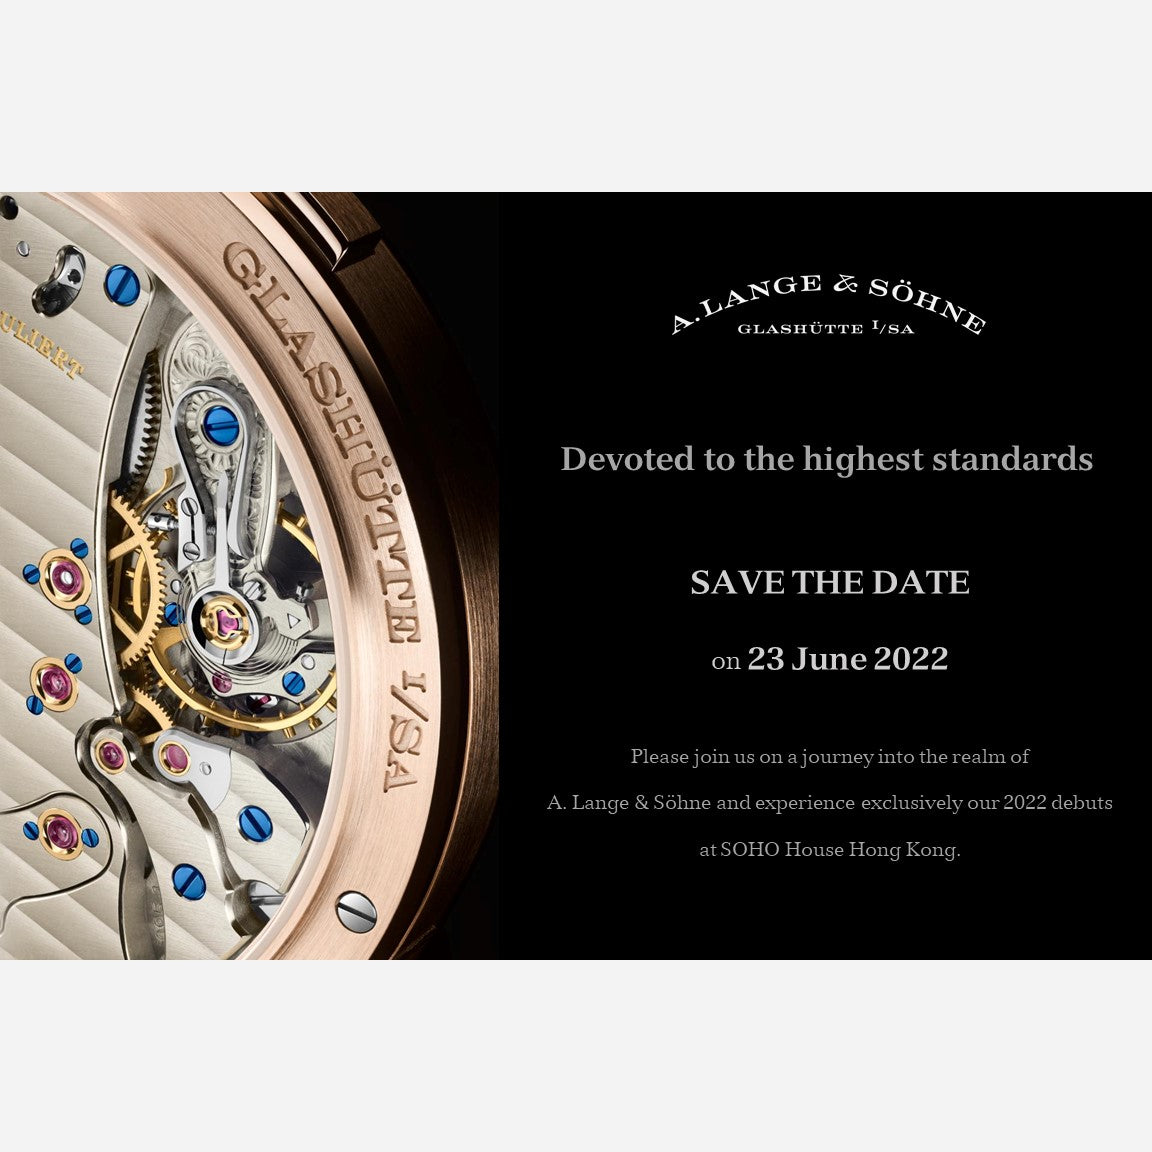 A. Lange & Söhne Novelties Private Viewing